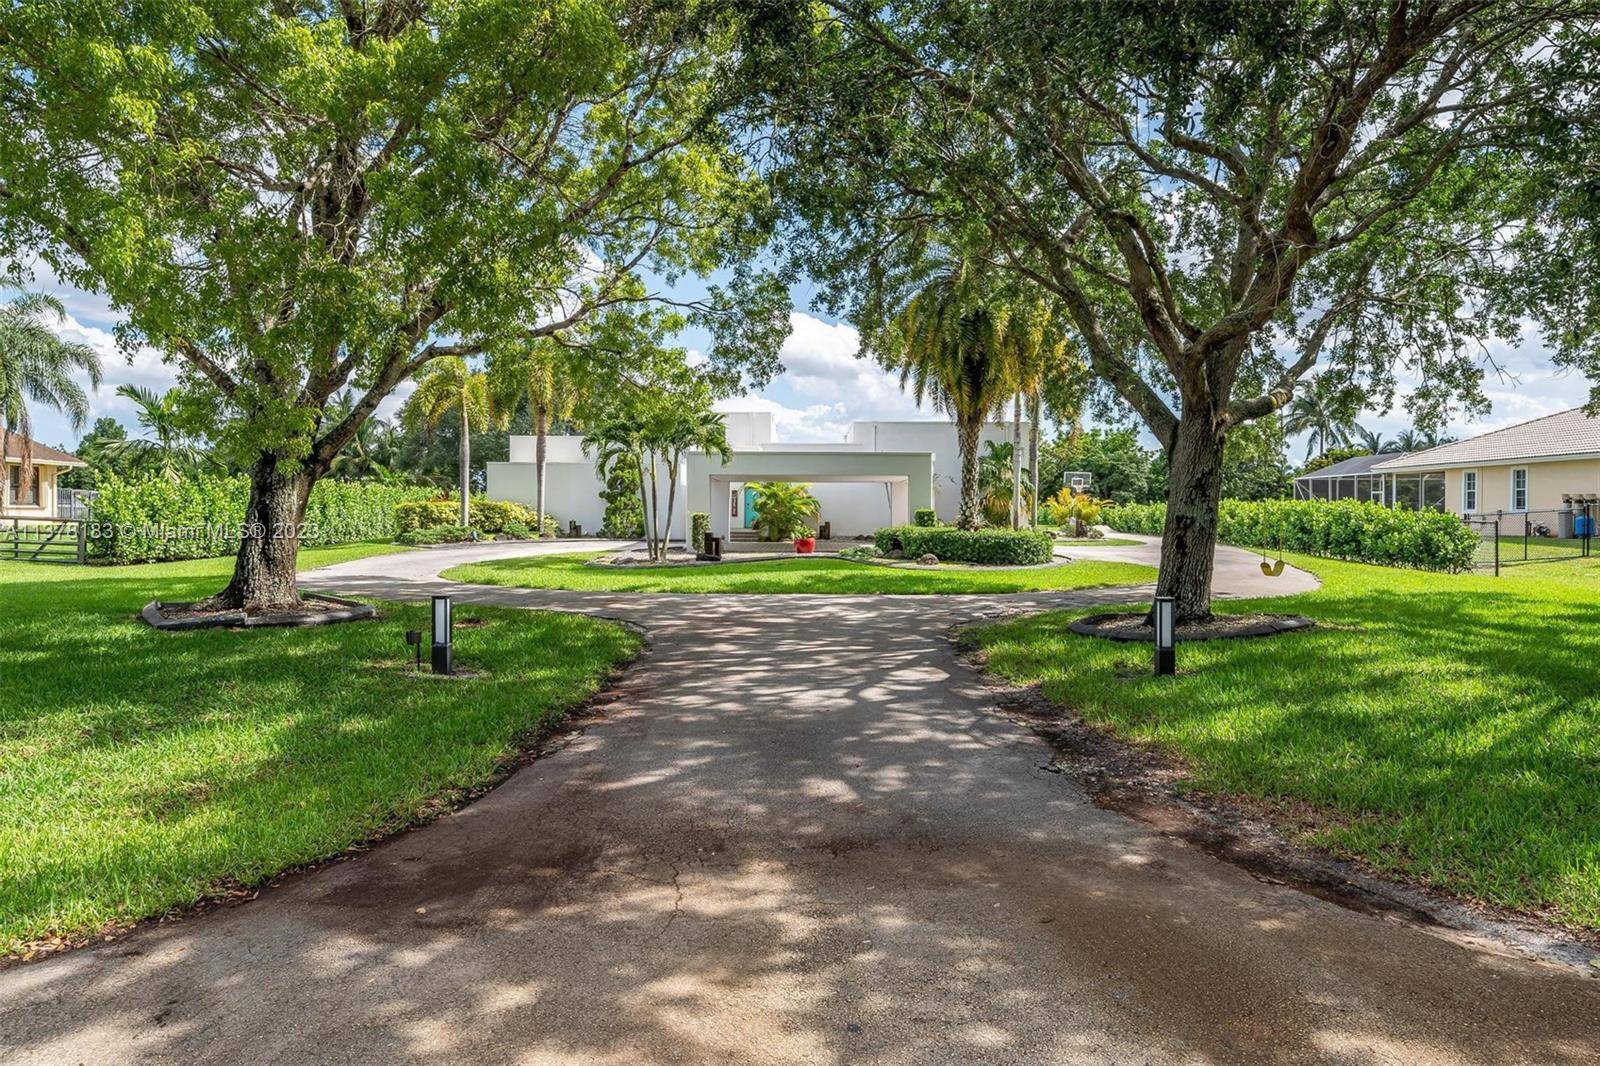 Incredible 5 bedroom 2. 5 bathroom Modern Masterpiece situated on a Builder s ACRE of land in one of the most desirable areas of Davie !